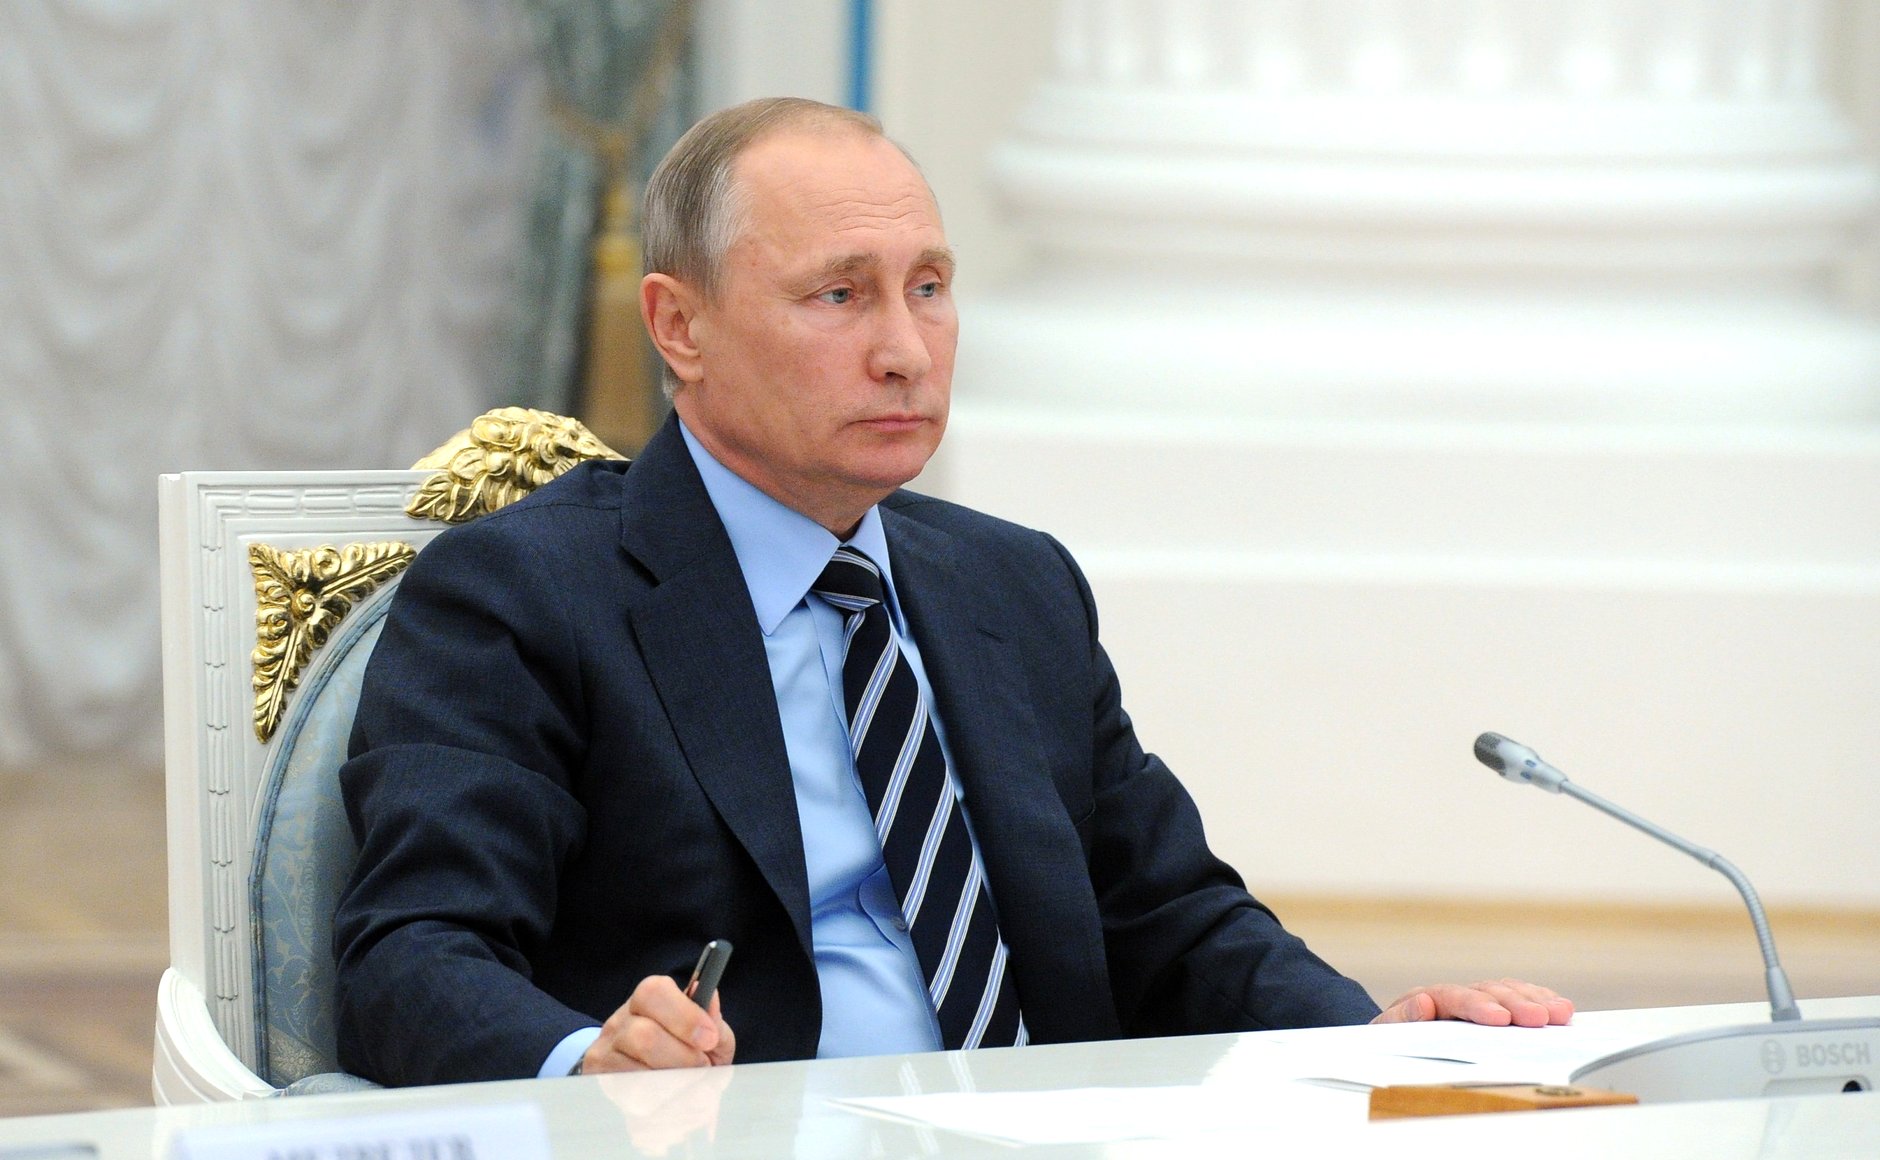 Vladimir Putin: The collapse of the USSR was "not necessary."